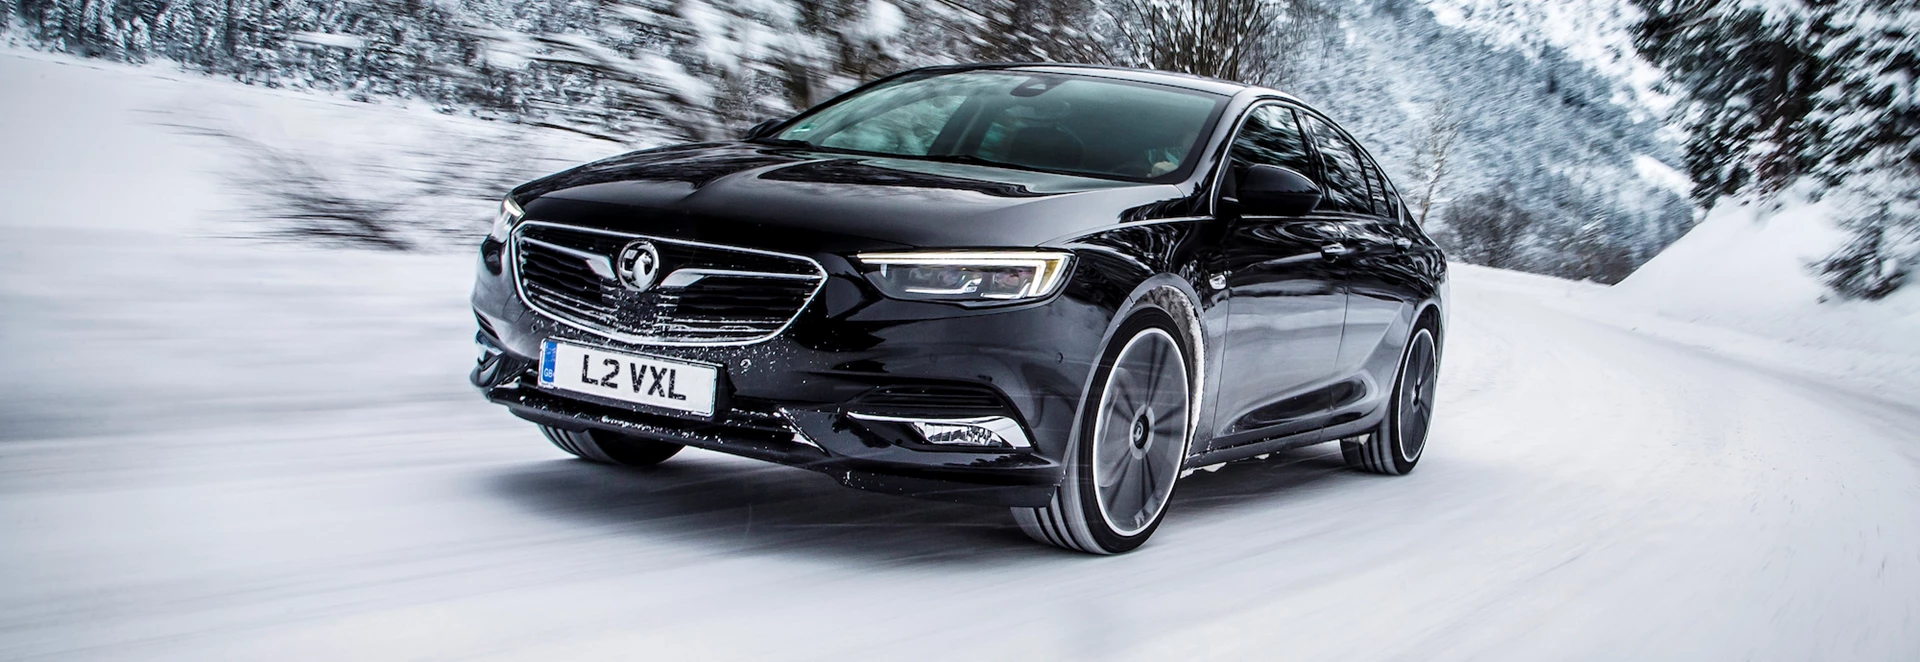 Second generation Vauxhall Insignia passes 100,000 orders